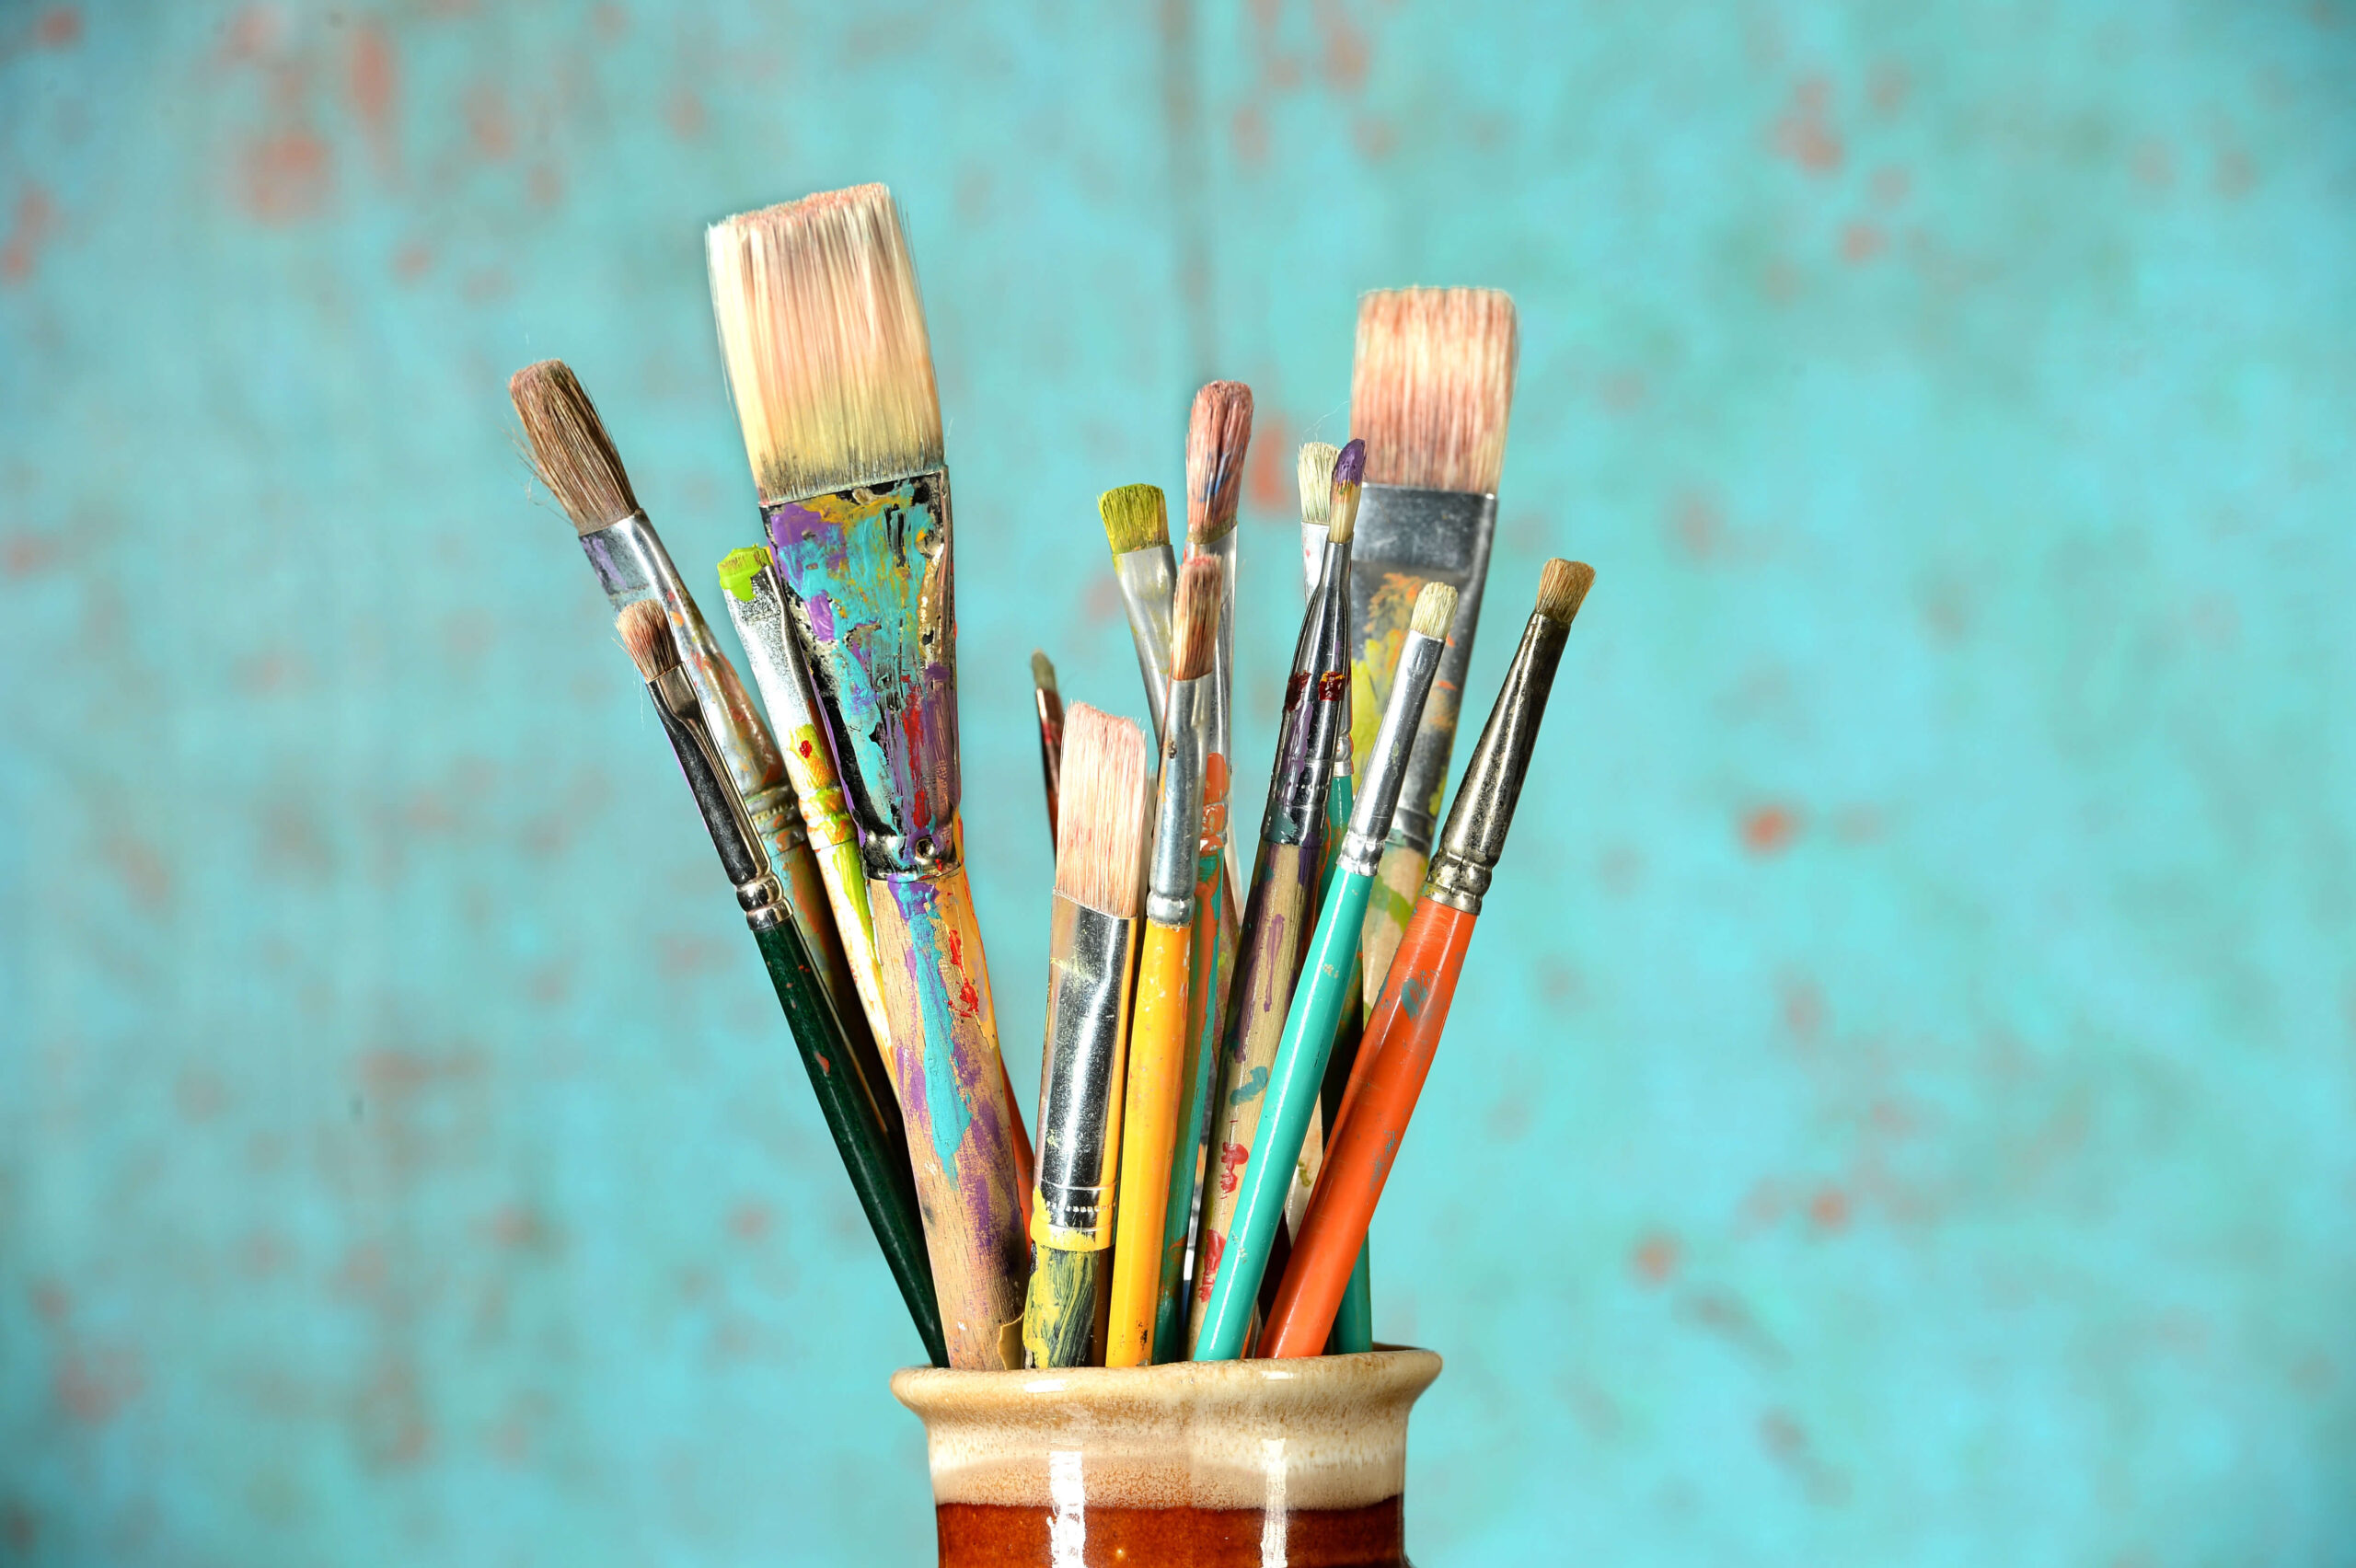 An image of paintbrushes in a jar